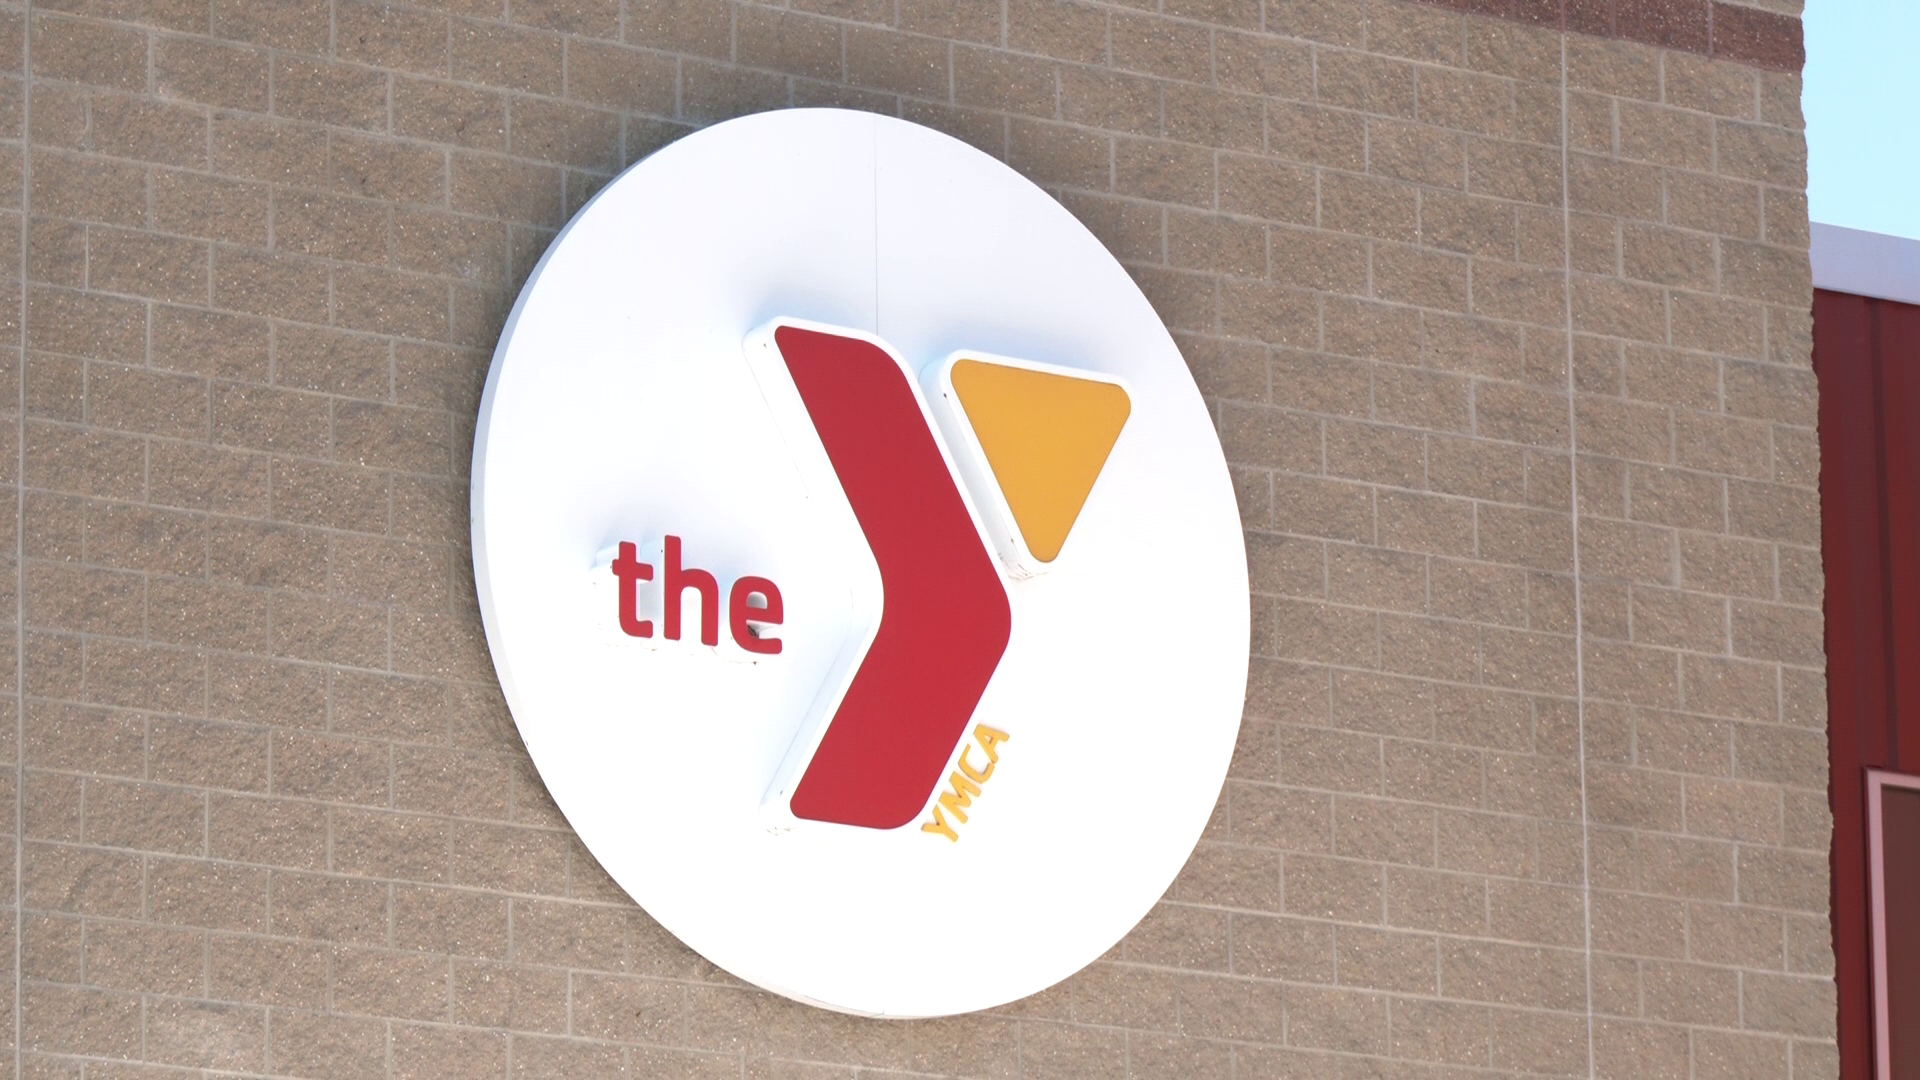 More kids will go to summer camp thanks to Grand Traverse Bay YMCA and TCAPS